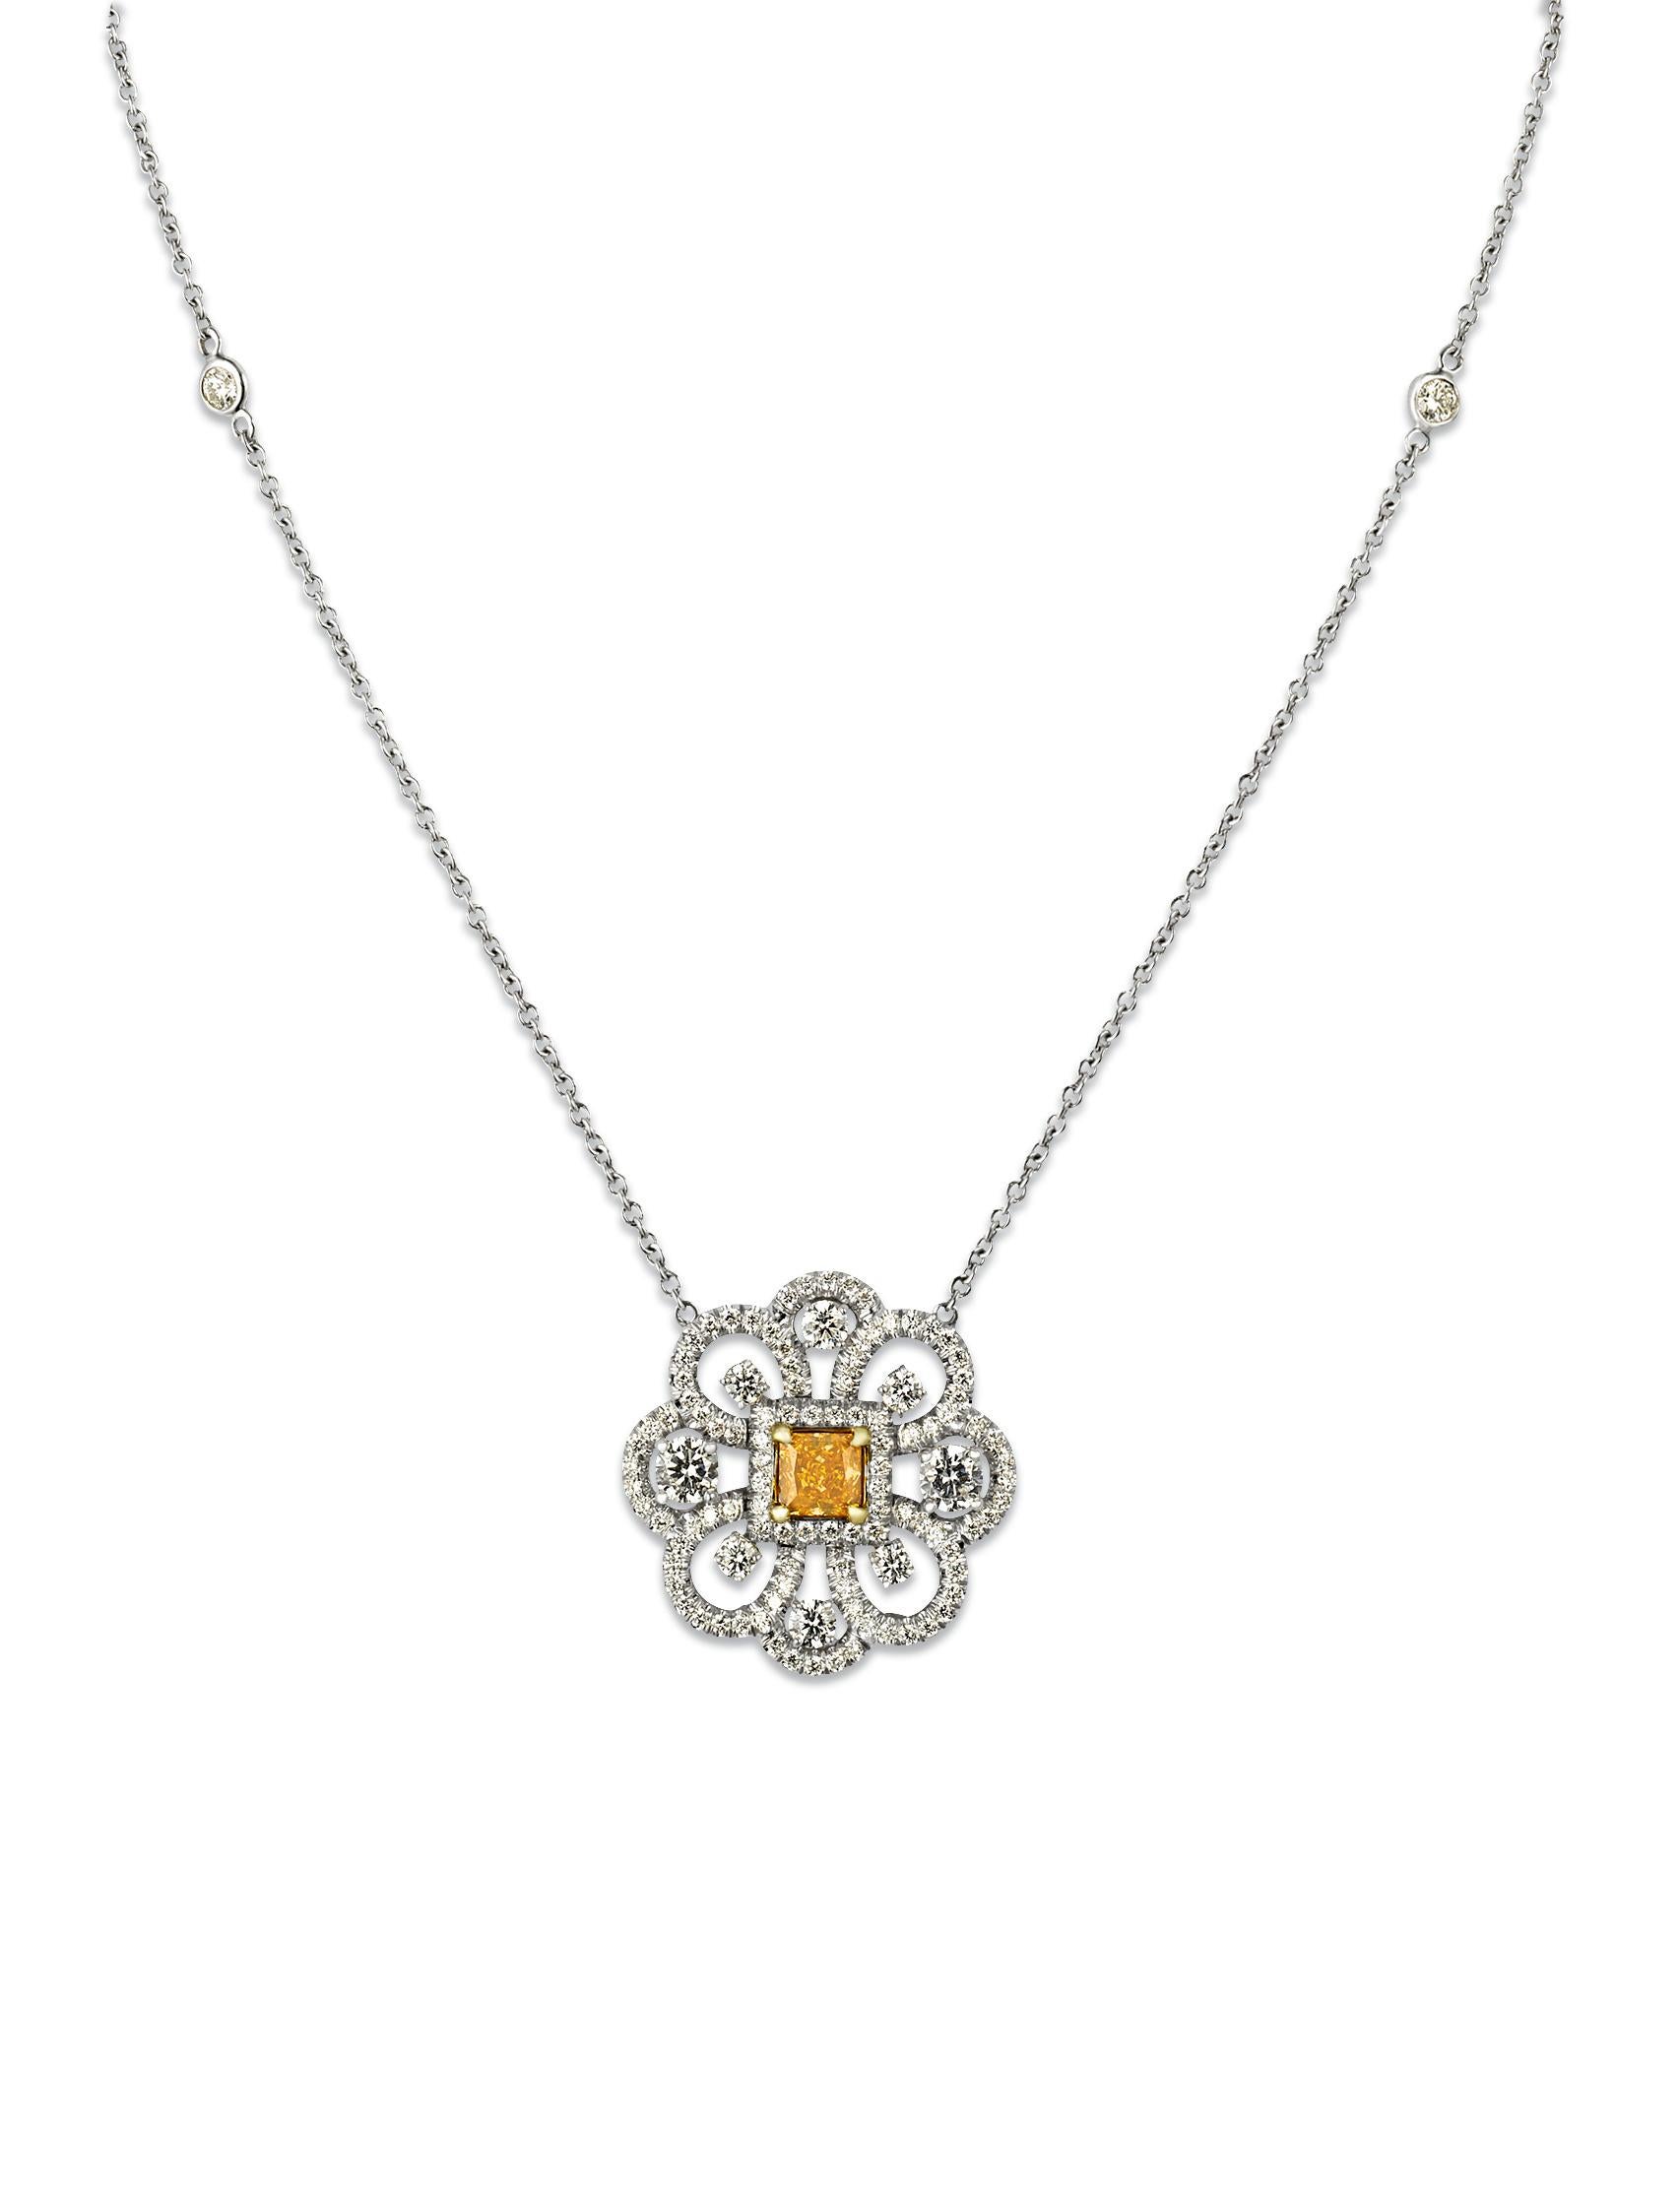 This charming pendant features a 0.43-carat fancy vivid yellowish orange diamond at its center. The rare stone is certified by the Gemological Institute of America (GIA) and has undergone no enhancements to achieve its distinctive color. Its